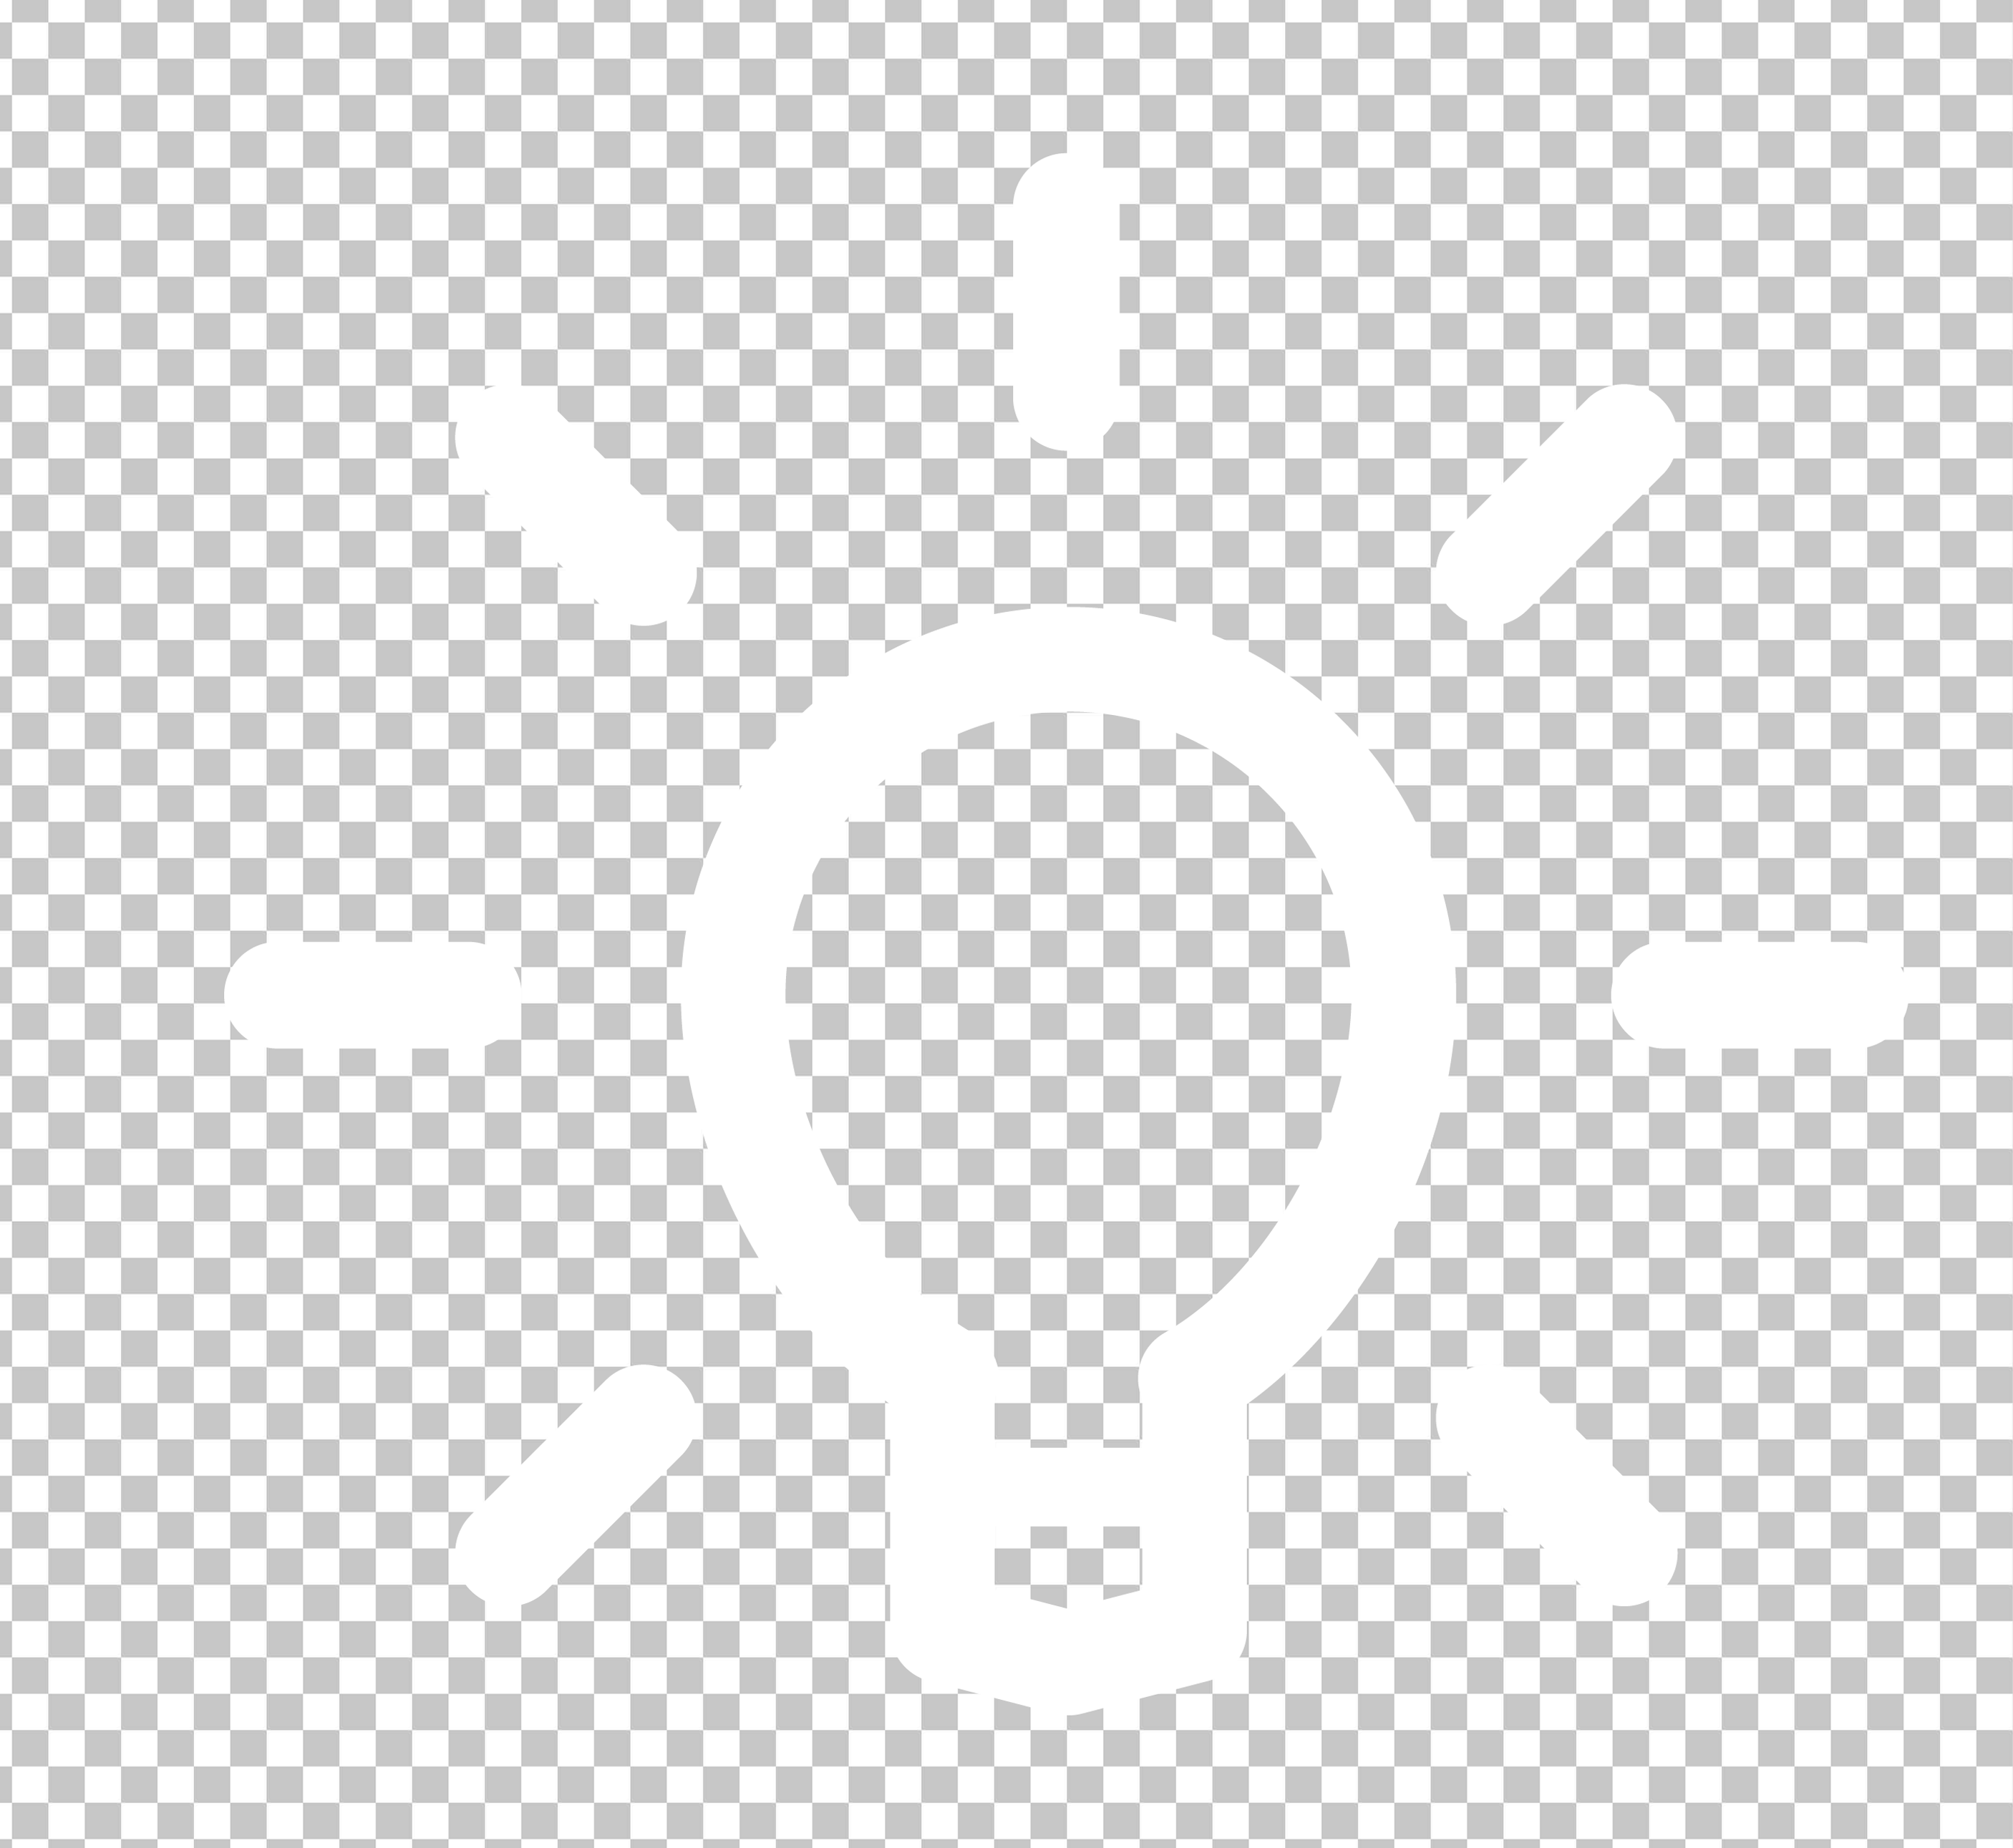 Light Bulb Icon PNG Image